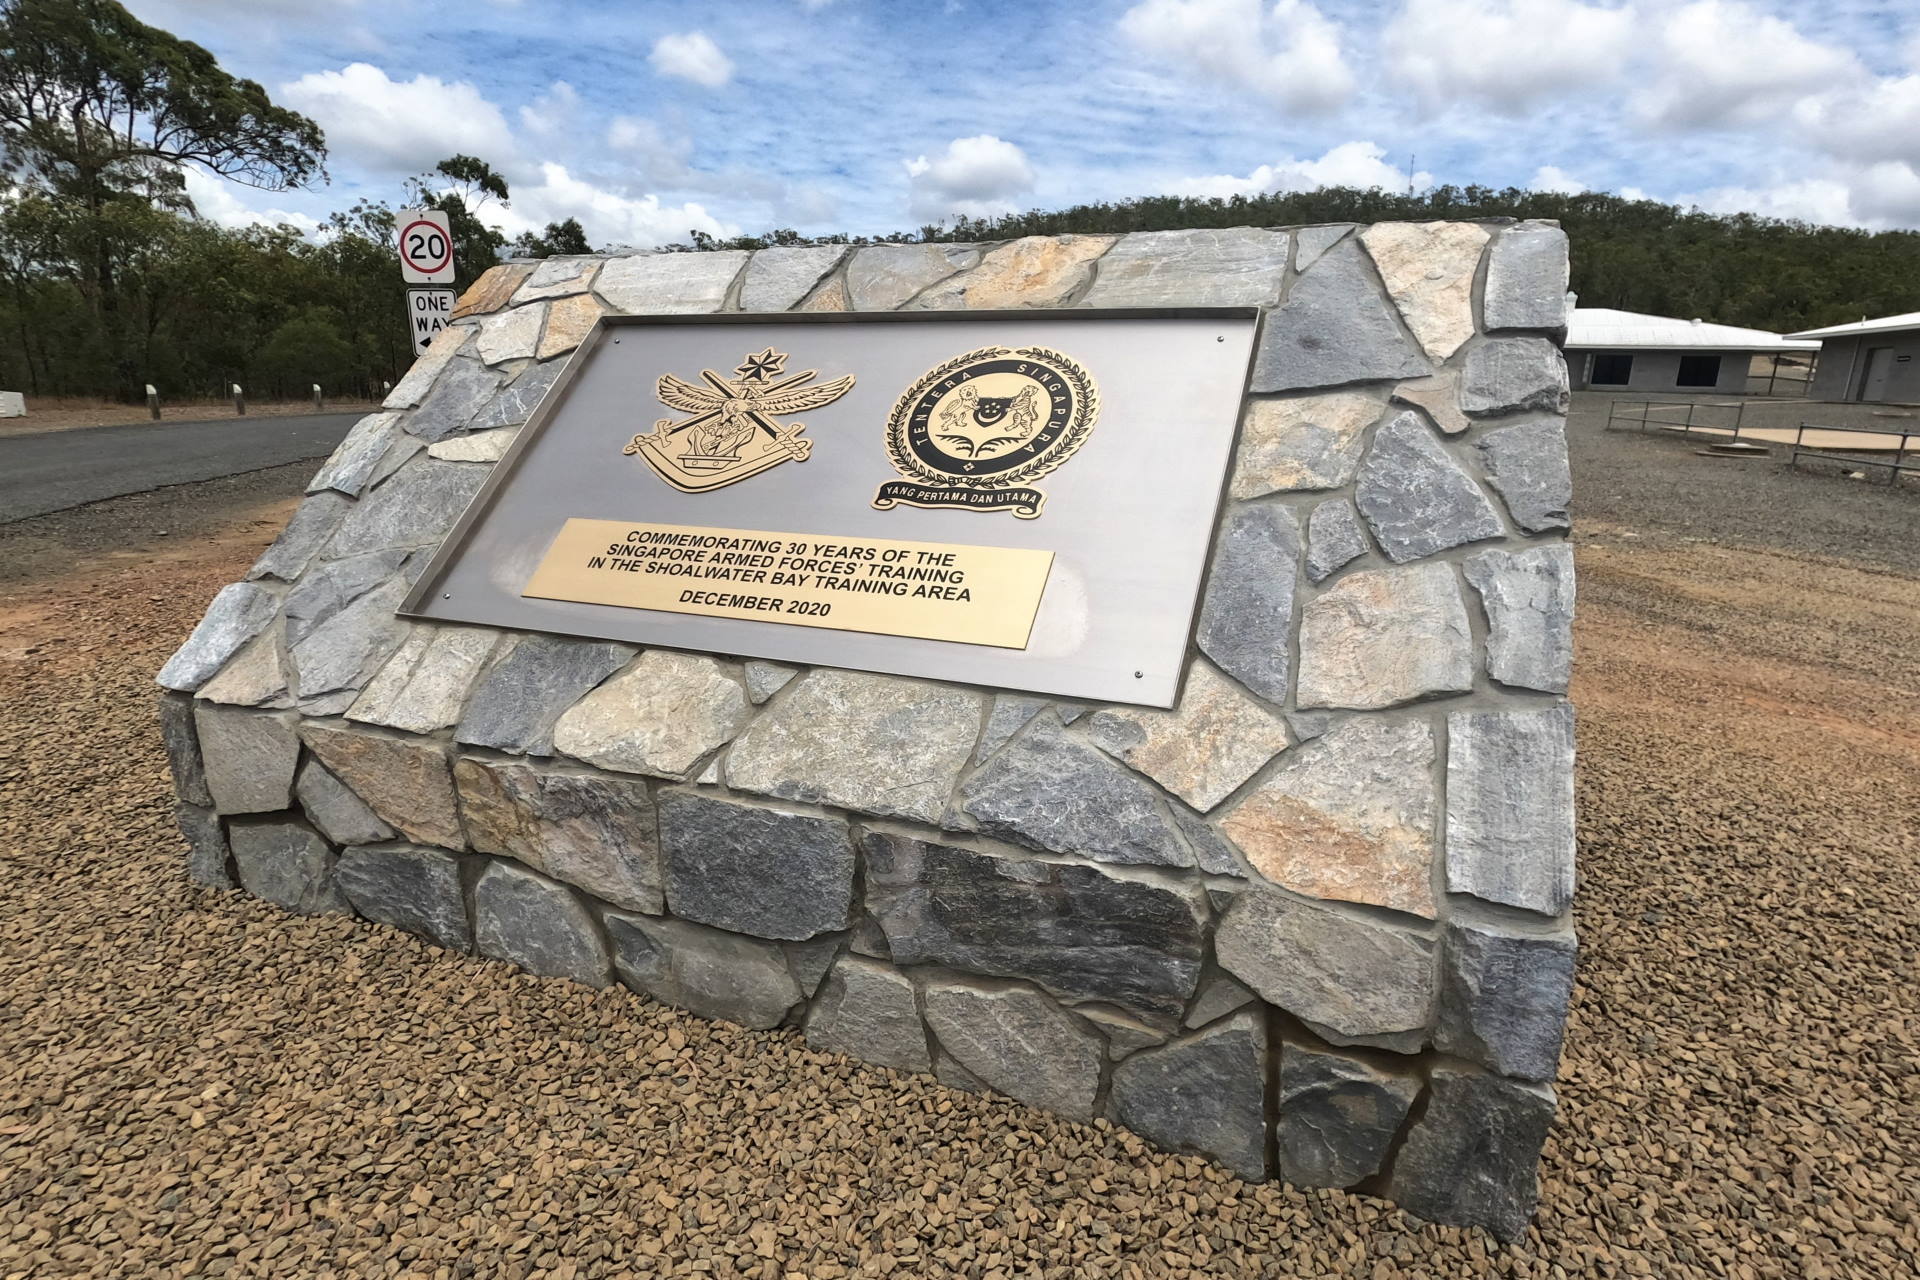 A commemorative plaque to commemorate the 30th anniversary of the SAF’s training in the SWBTA has been installed at Camp Growl, which has housed the majority of SAF personnel who trained in the SWBTA.